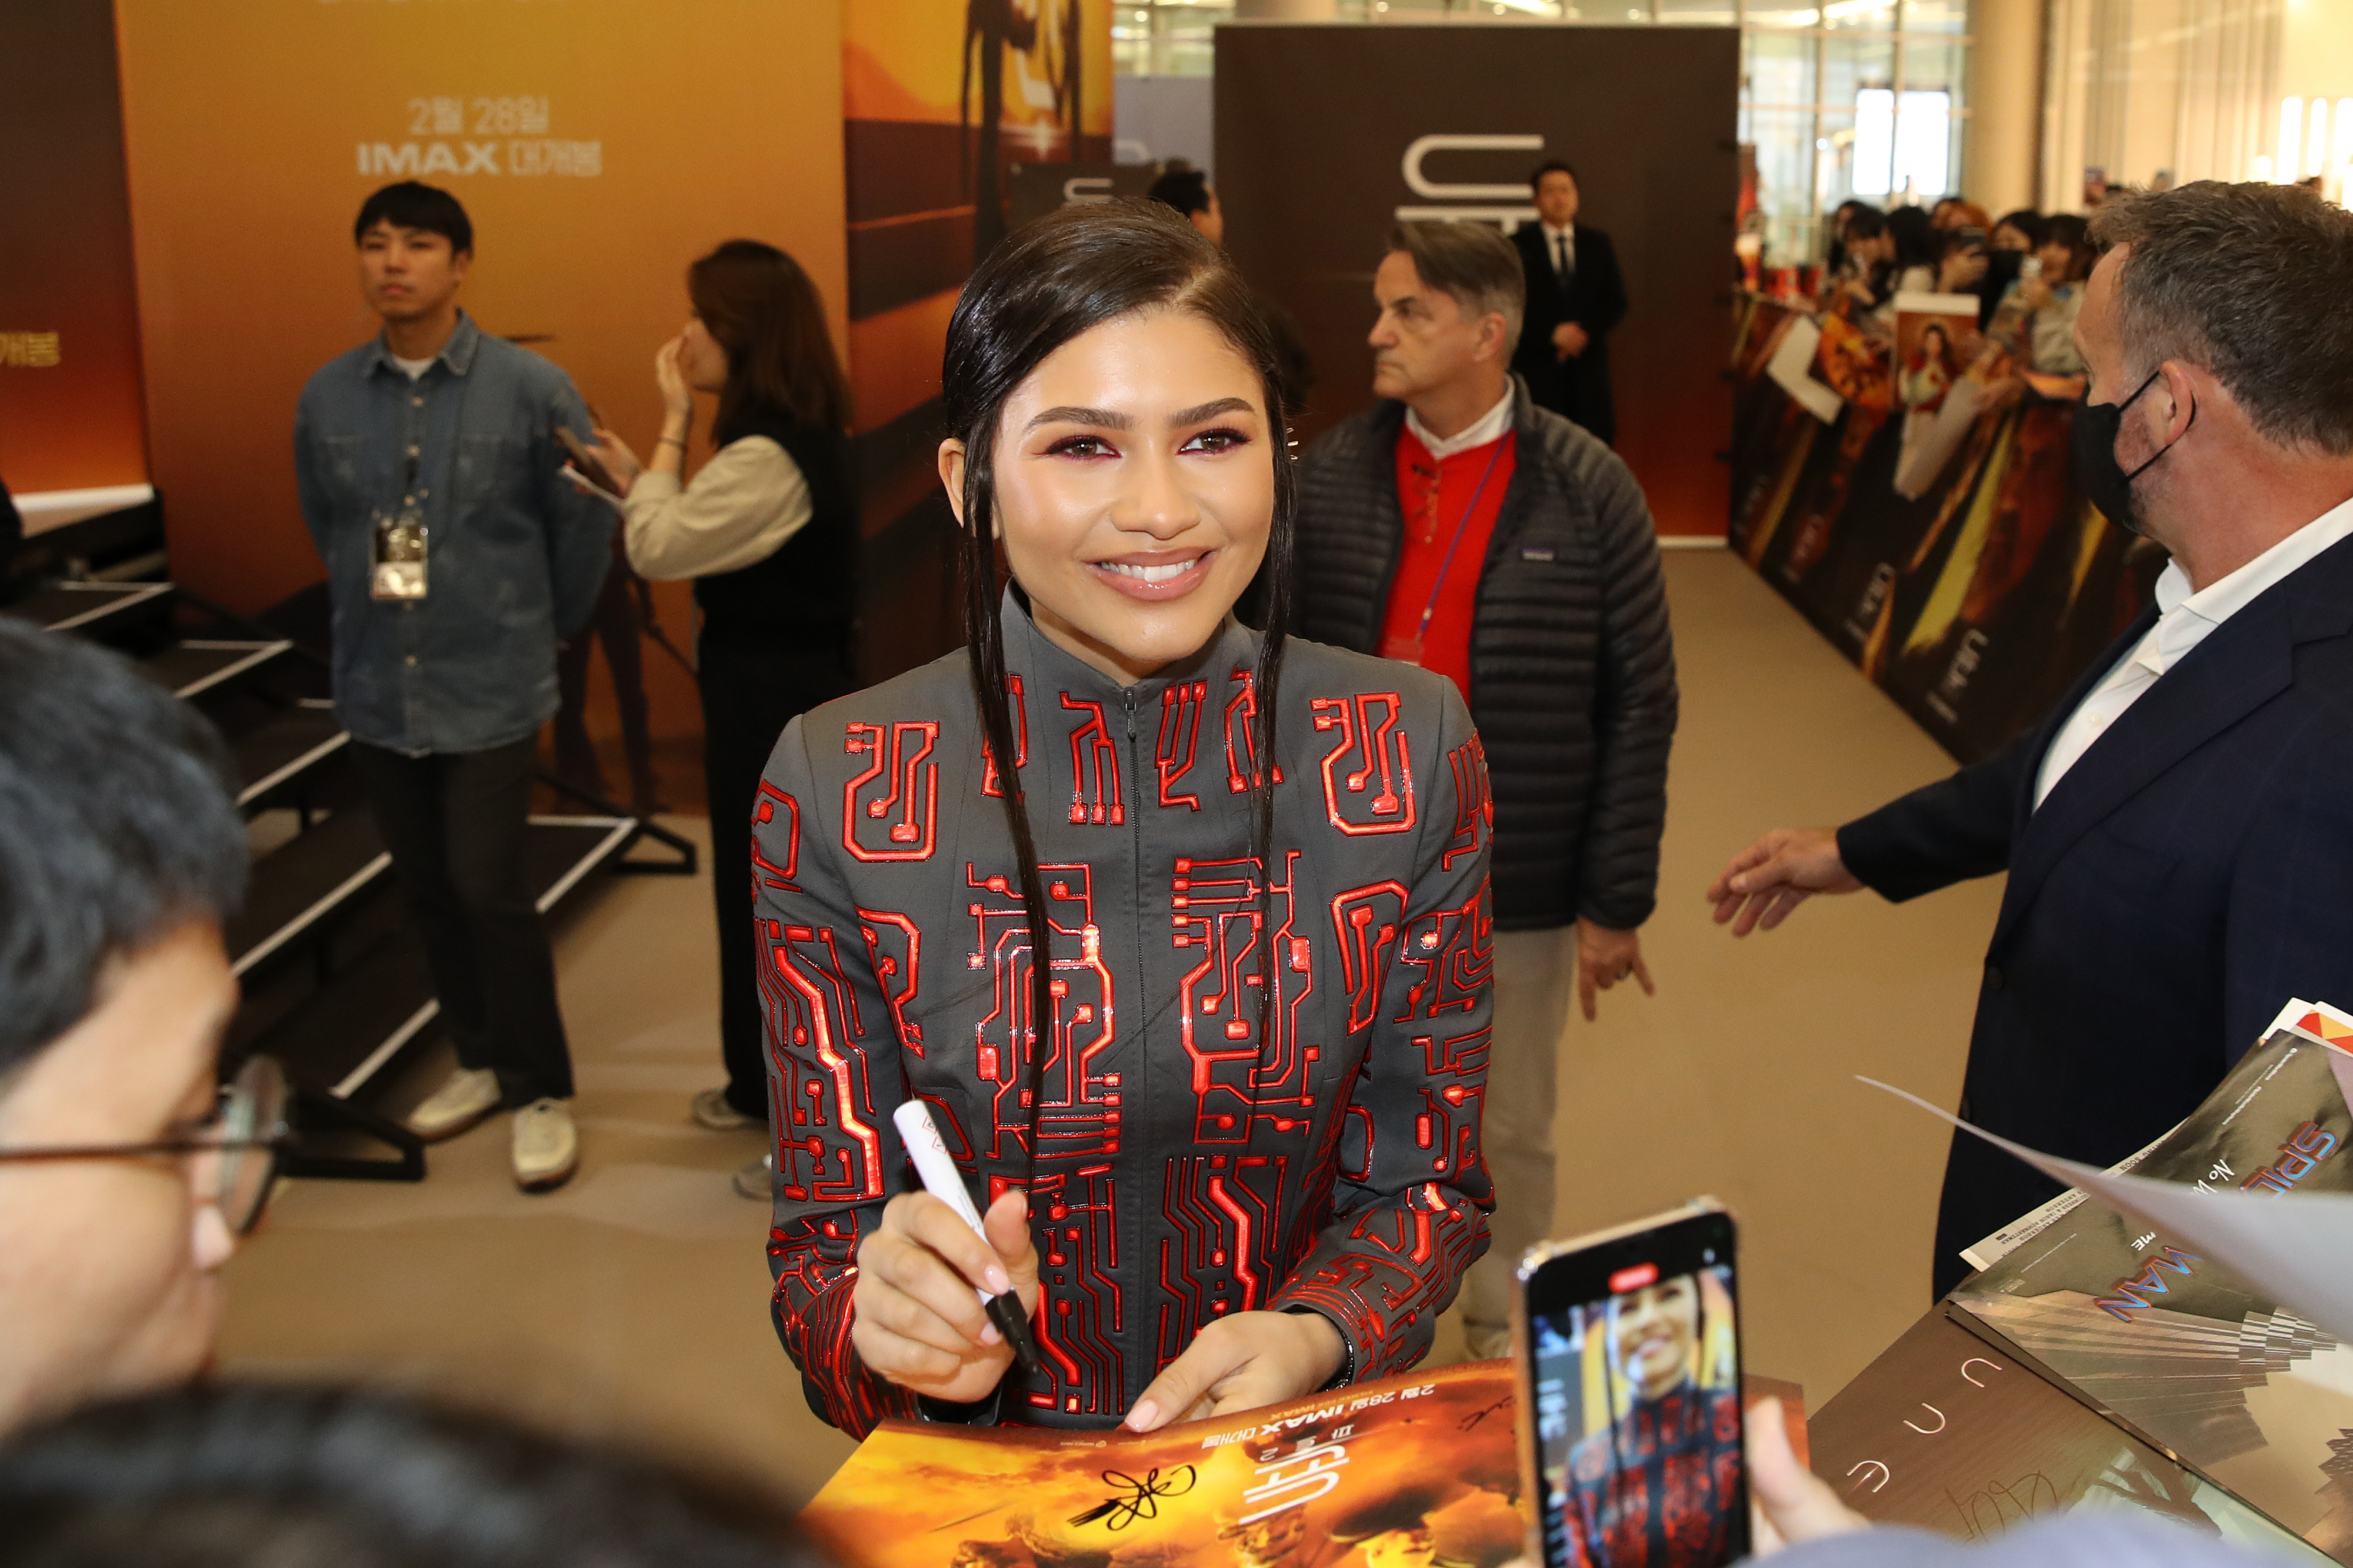 Zendaya smiles, signing autographs in a patterned jacket at an event